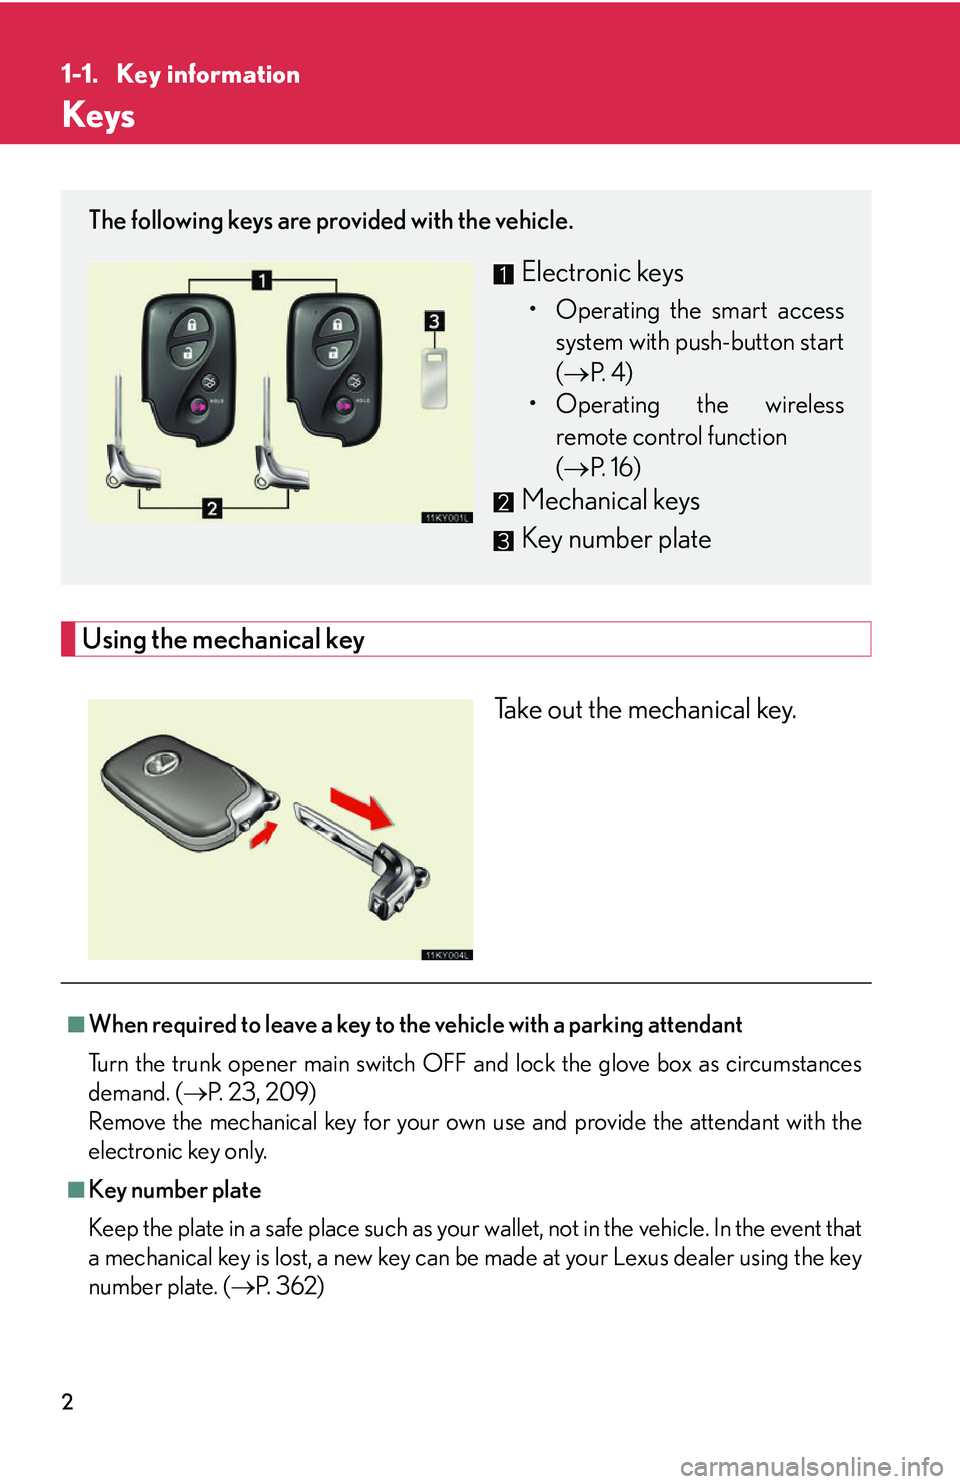 Lexus IS250 2006  Lexus Parking Assist-sensor / LEXUS 2006 IS350/250 FROM MAY 2006 PROD.  (OM53619U) User Guide 2
1-1. Key information
Keys
Using the mechanical keyTake out the mechanical key.
The following keys are provided with the vehicle.
Electronic keys
• Operating the smart accesssystem with push-button